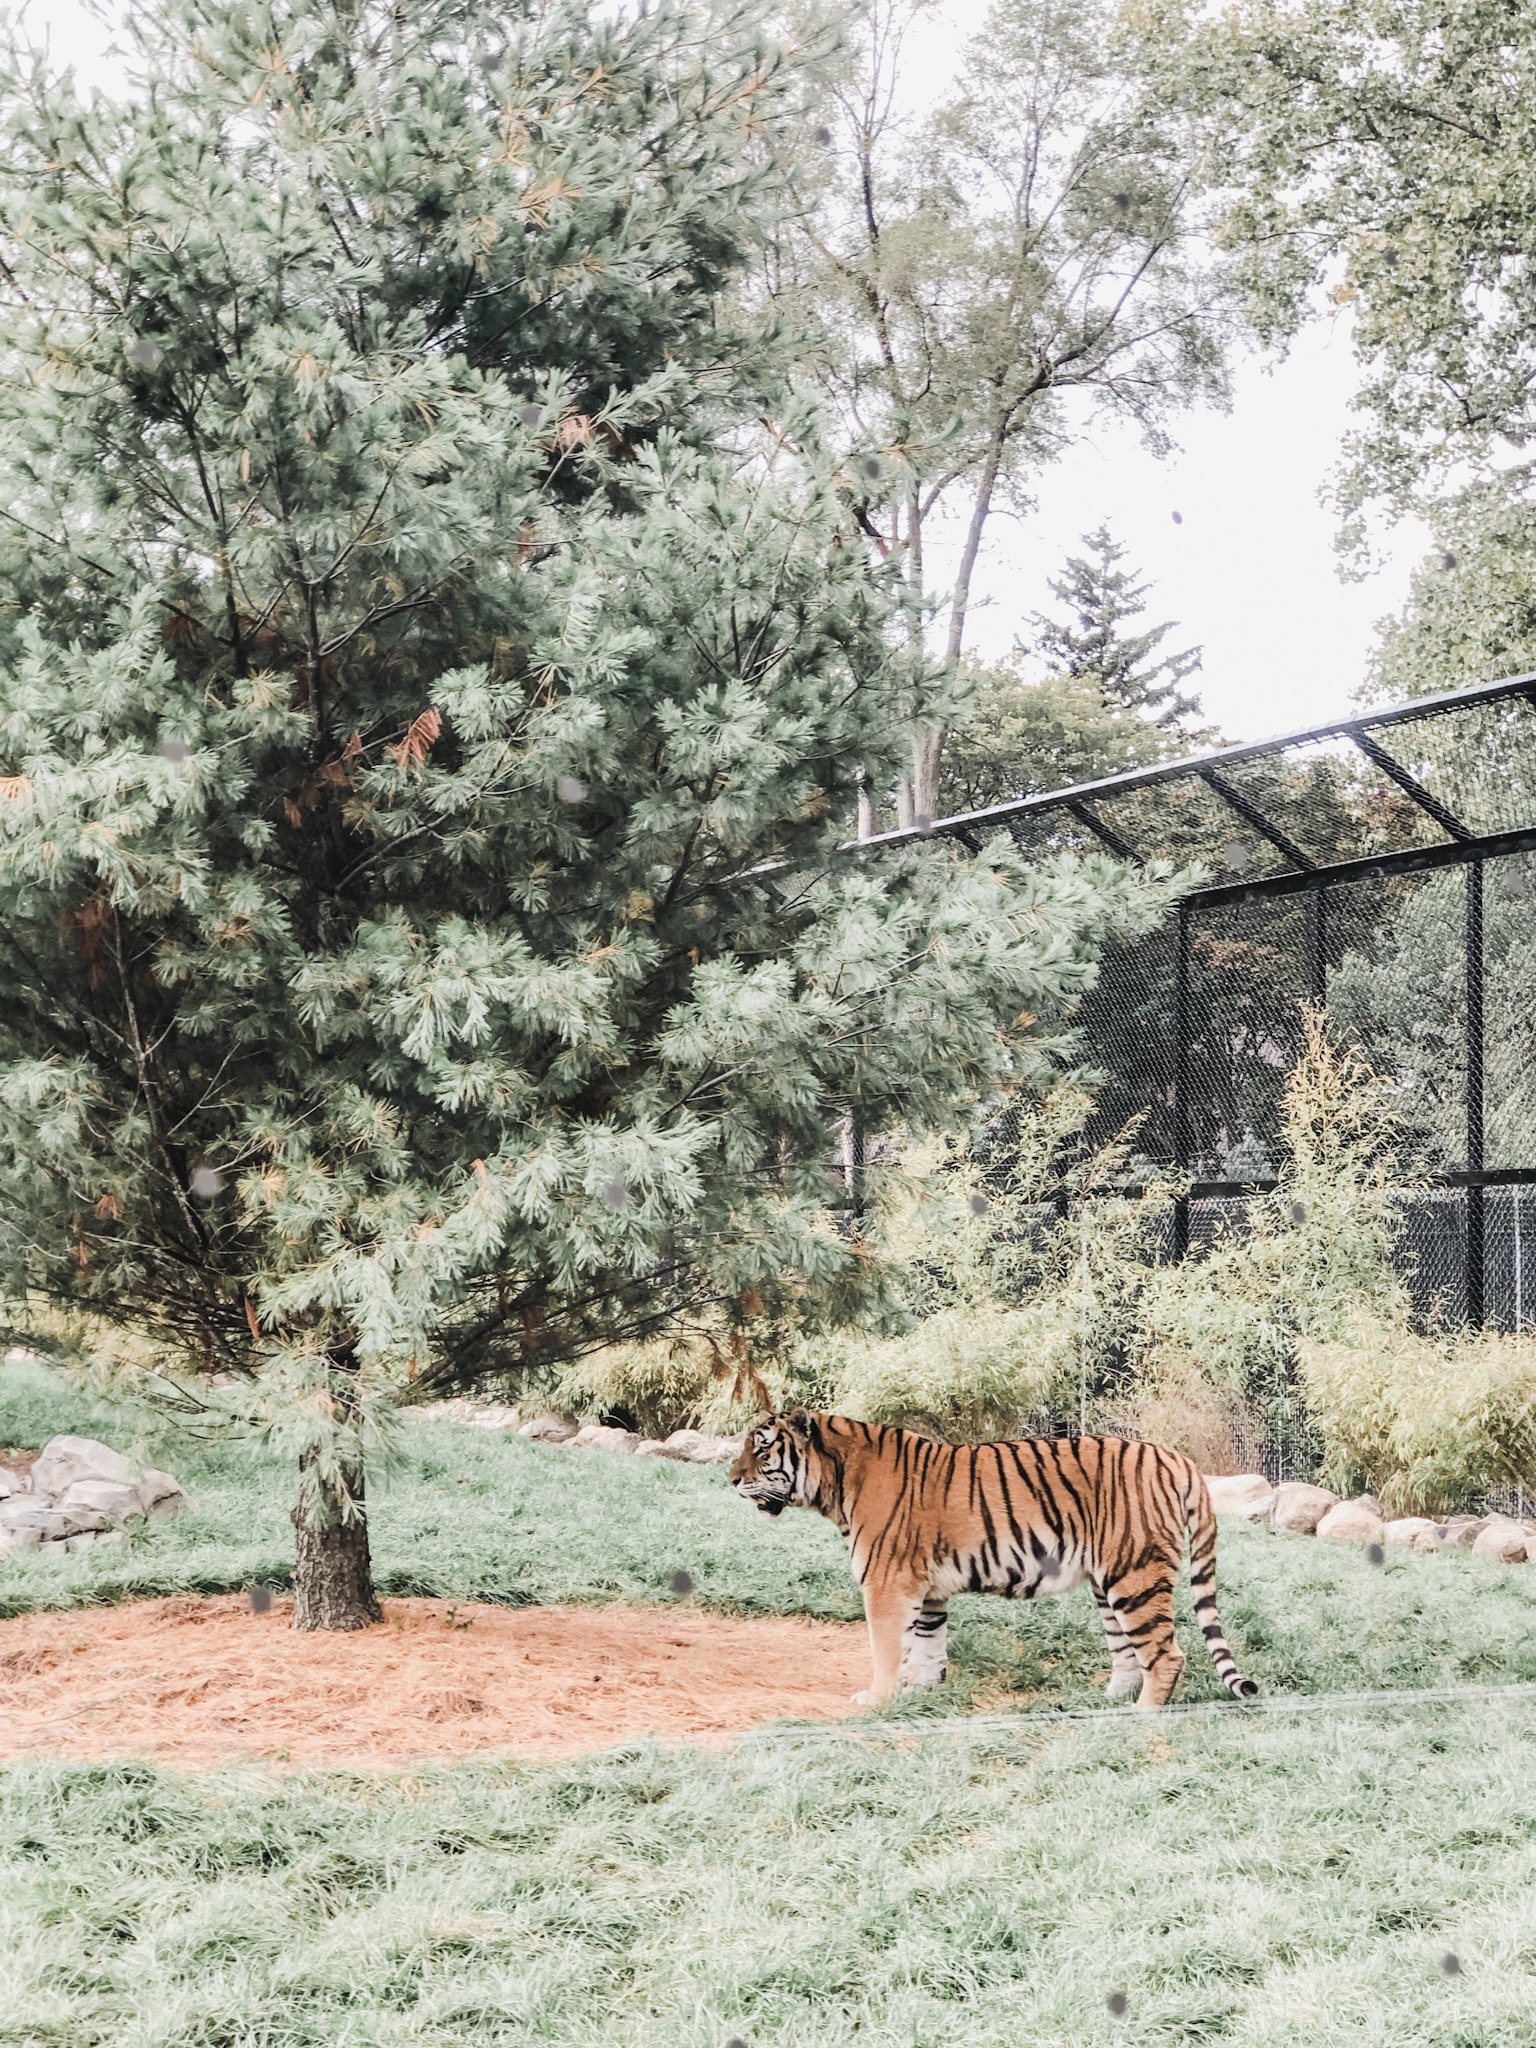 We love visiting the Detroit Zoo especially in the fall. This autumn was extra special because they opened the new Deveraux Tiger Forest. The new tiger exhibit features a spacious landscape that resembles their native home of Russia with waterfalls, pools, and wooded areas.